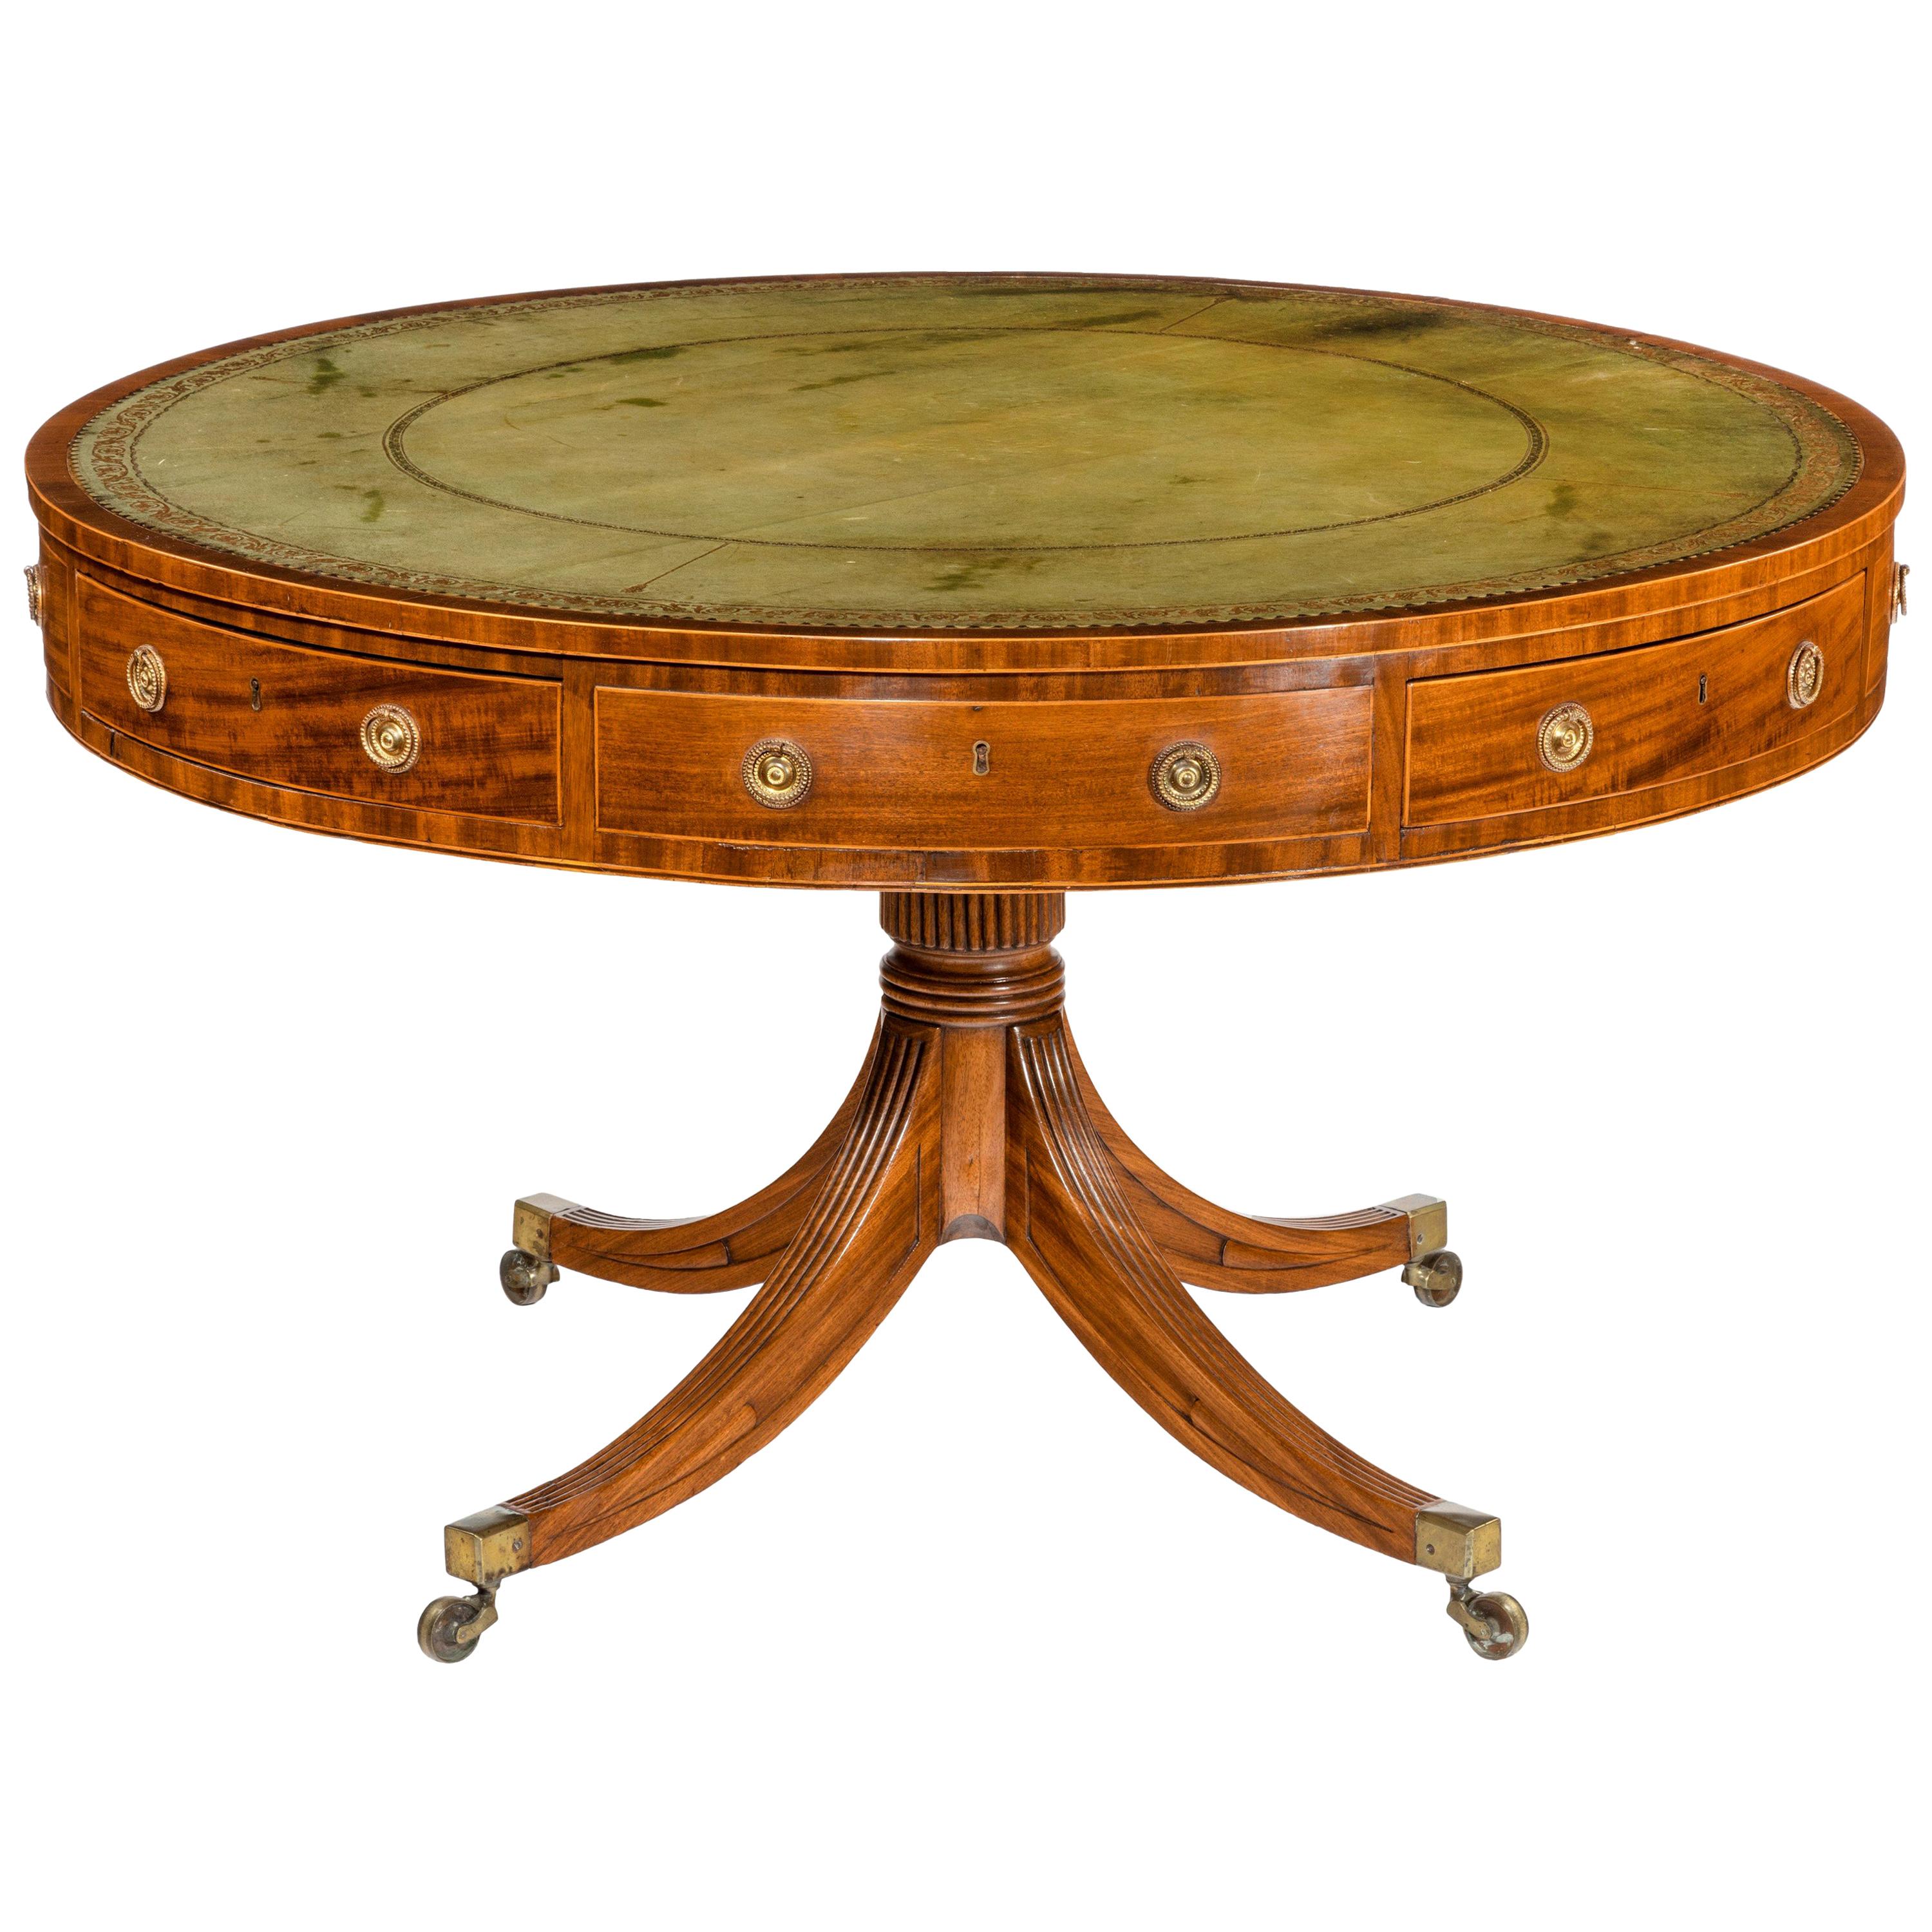 Late George III Revolving Mahogany Drum Table Attributed to Gillows For Sale